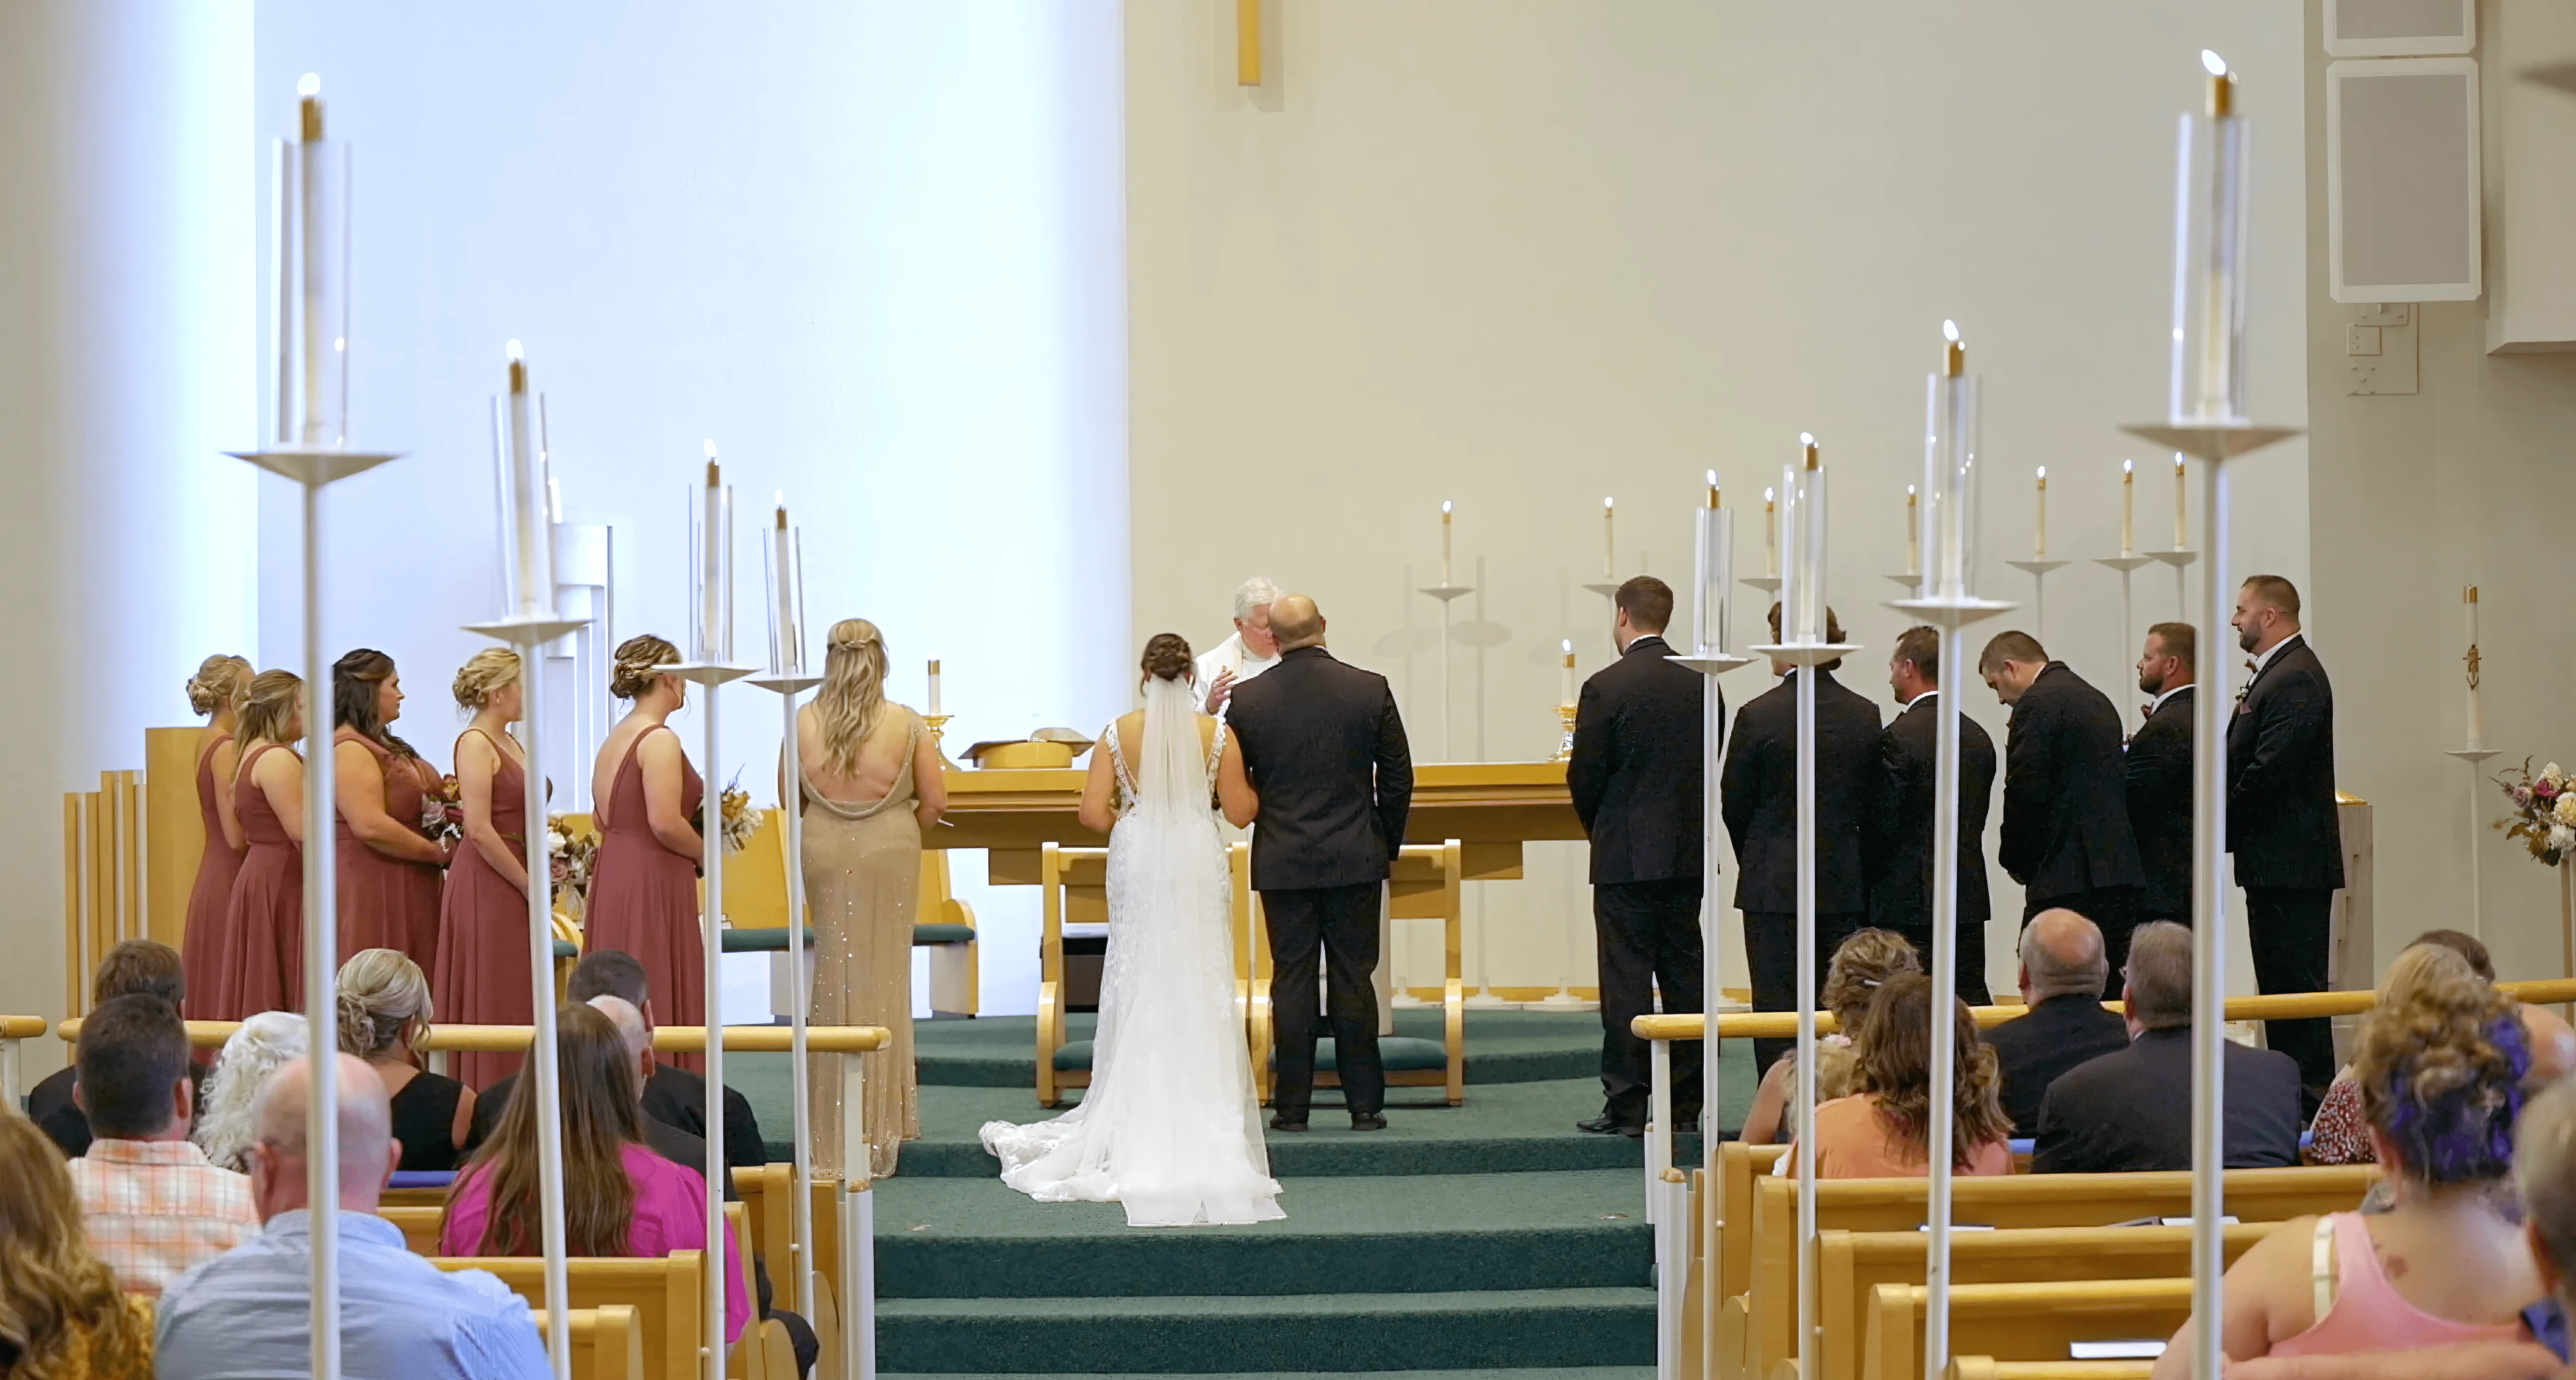 Wedding ceremony in a church with a bride and groom at the altar, bridesmaids in rose dresses, groomsmen in black suits, and guests seated in pews.